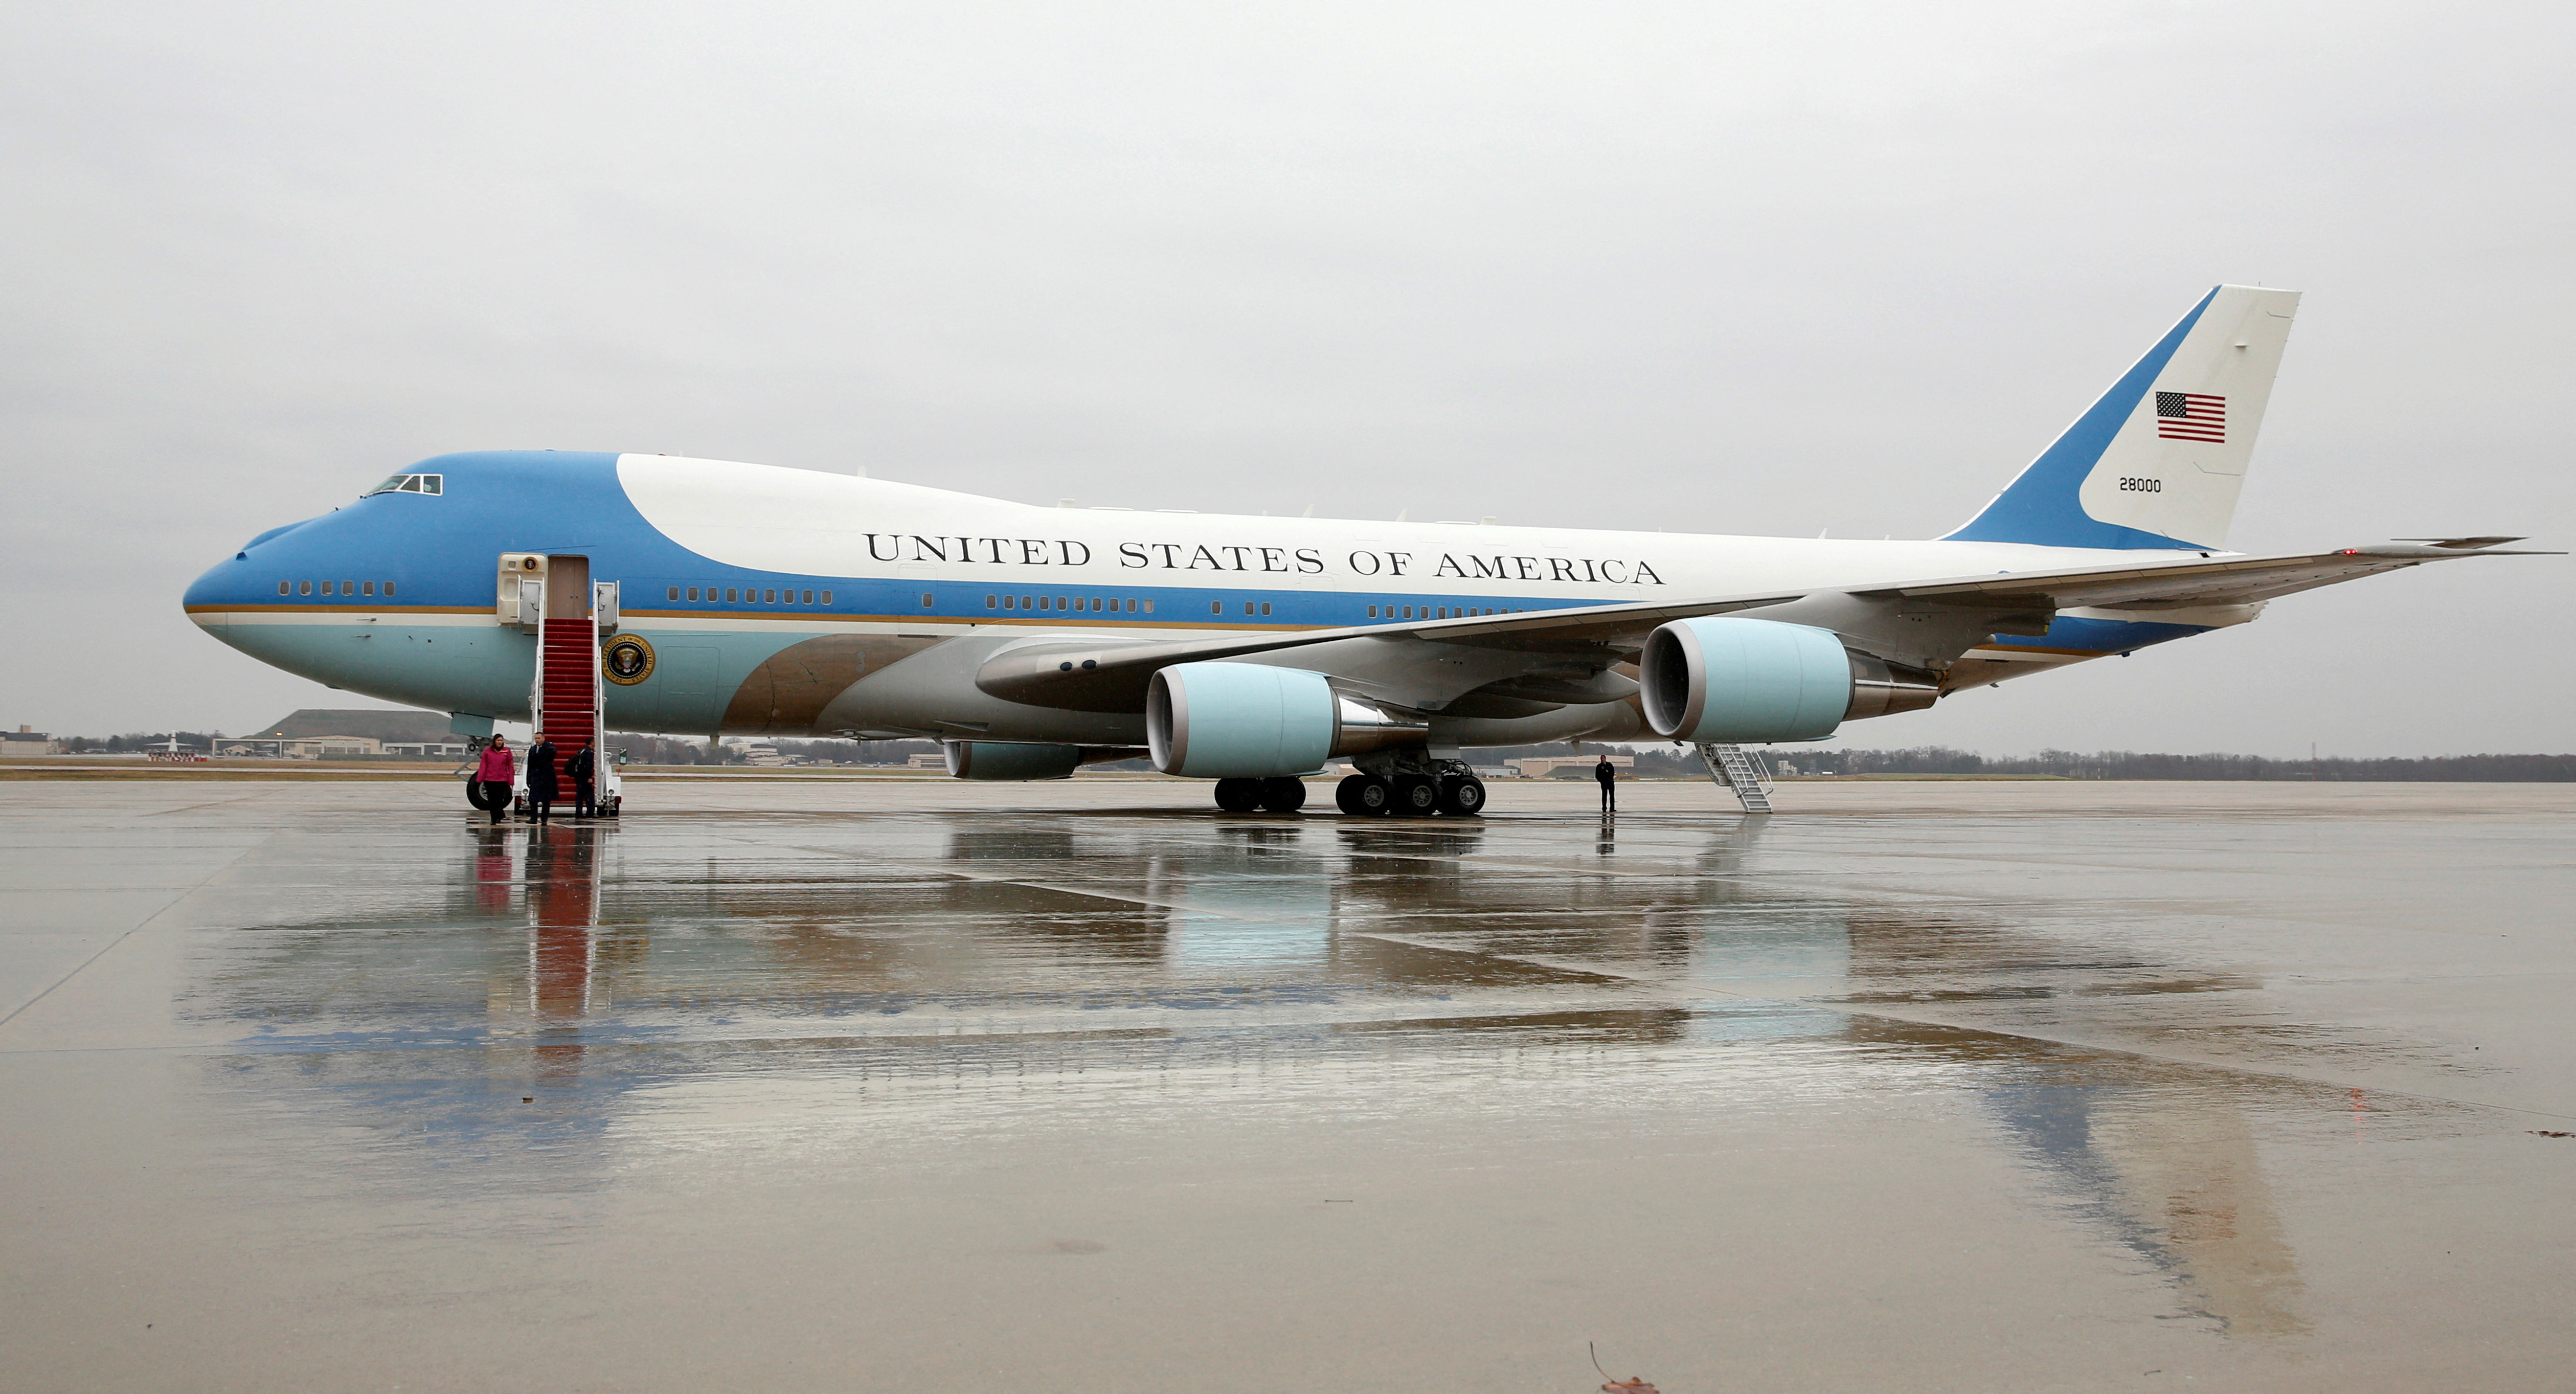 Air Force One at Joint Base Andrews in Maryland